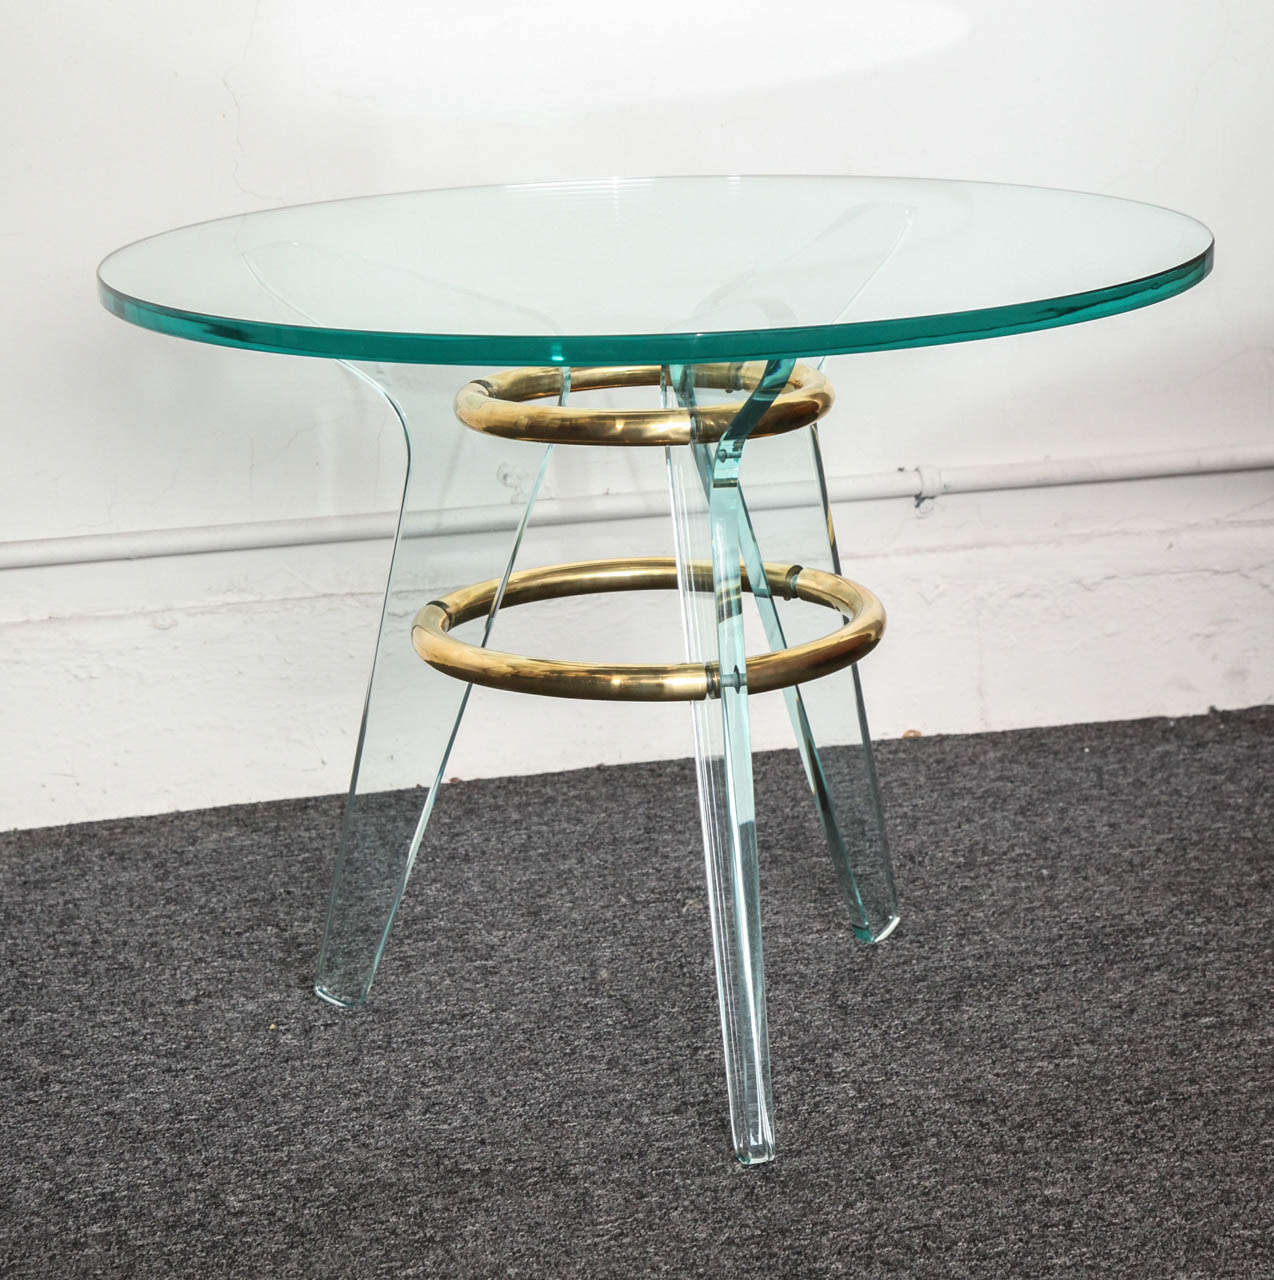 STUNNING ROUND COCKTAIL / SIDE TABLE MADE IN MILAN 1940'S, VERY UNUSUAL FORM IN THAT IT HAS 2 BRASS RINGS THAT CONNECT THE 3 GLASS LEGS TO FORM THE BASE of THE TABLE, BEAUTIFULLY MADE.